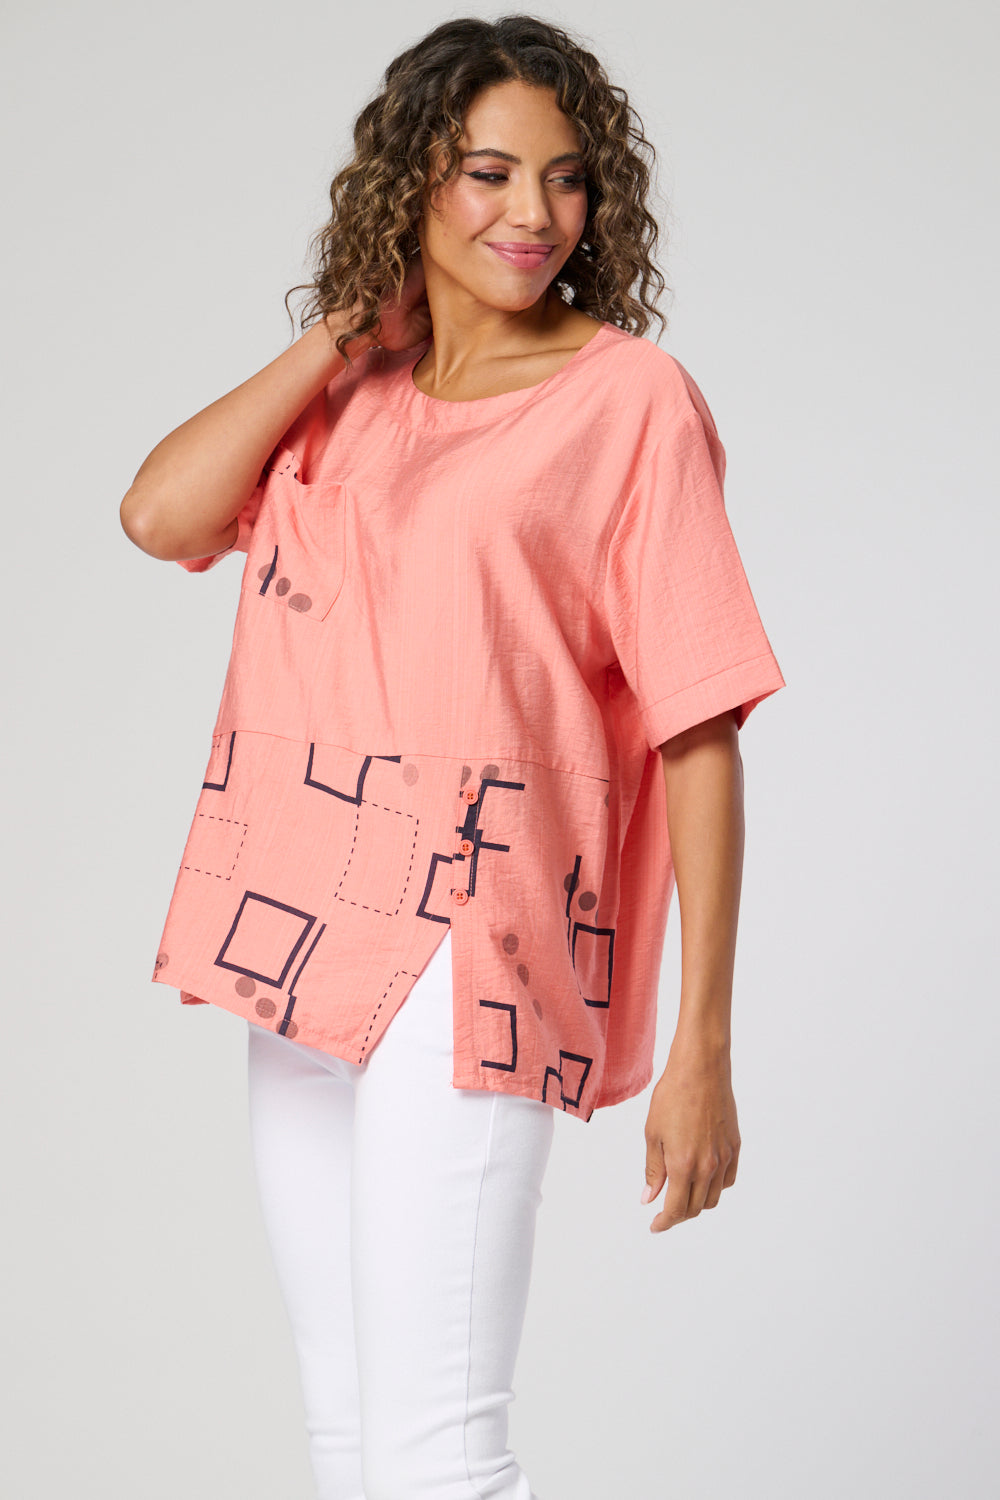 7559-A Oversized print/plain top with breast pocket and button split (Wholesale Pack Of 7) Pre-Order